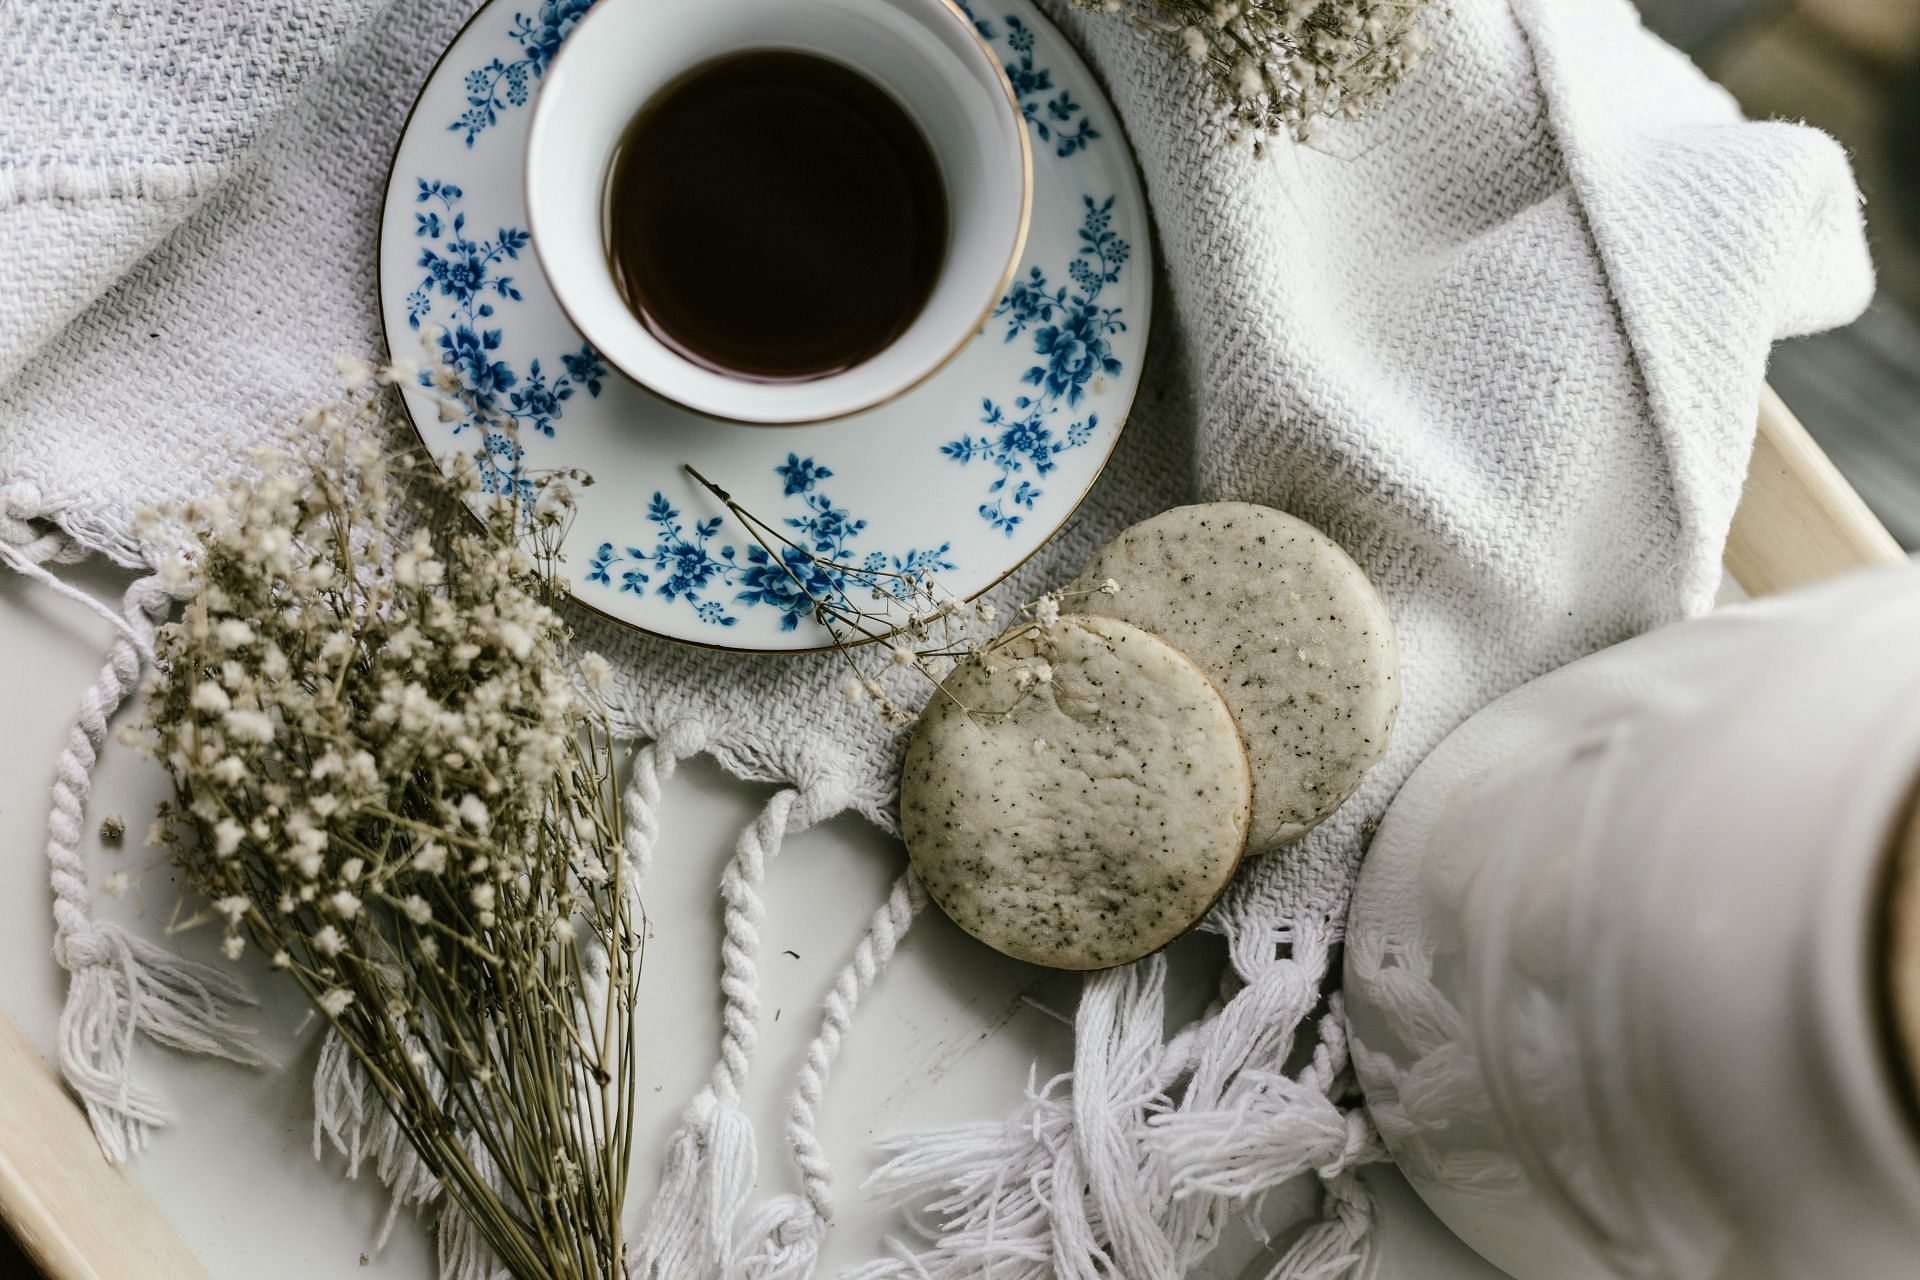 What are the health benefits of Earl Grey? (Image by Priscilla Du Preez/Unsplash)